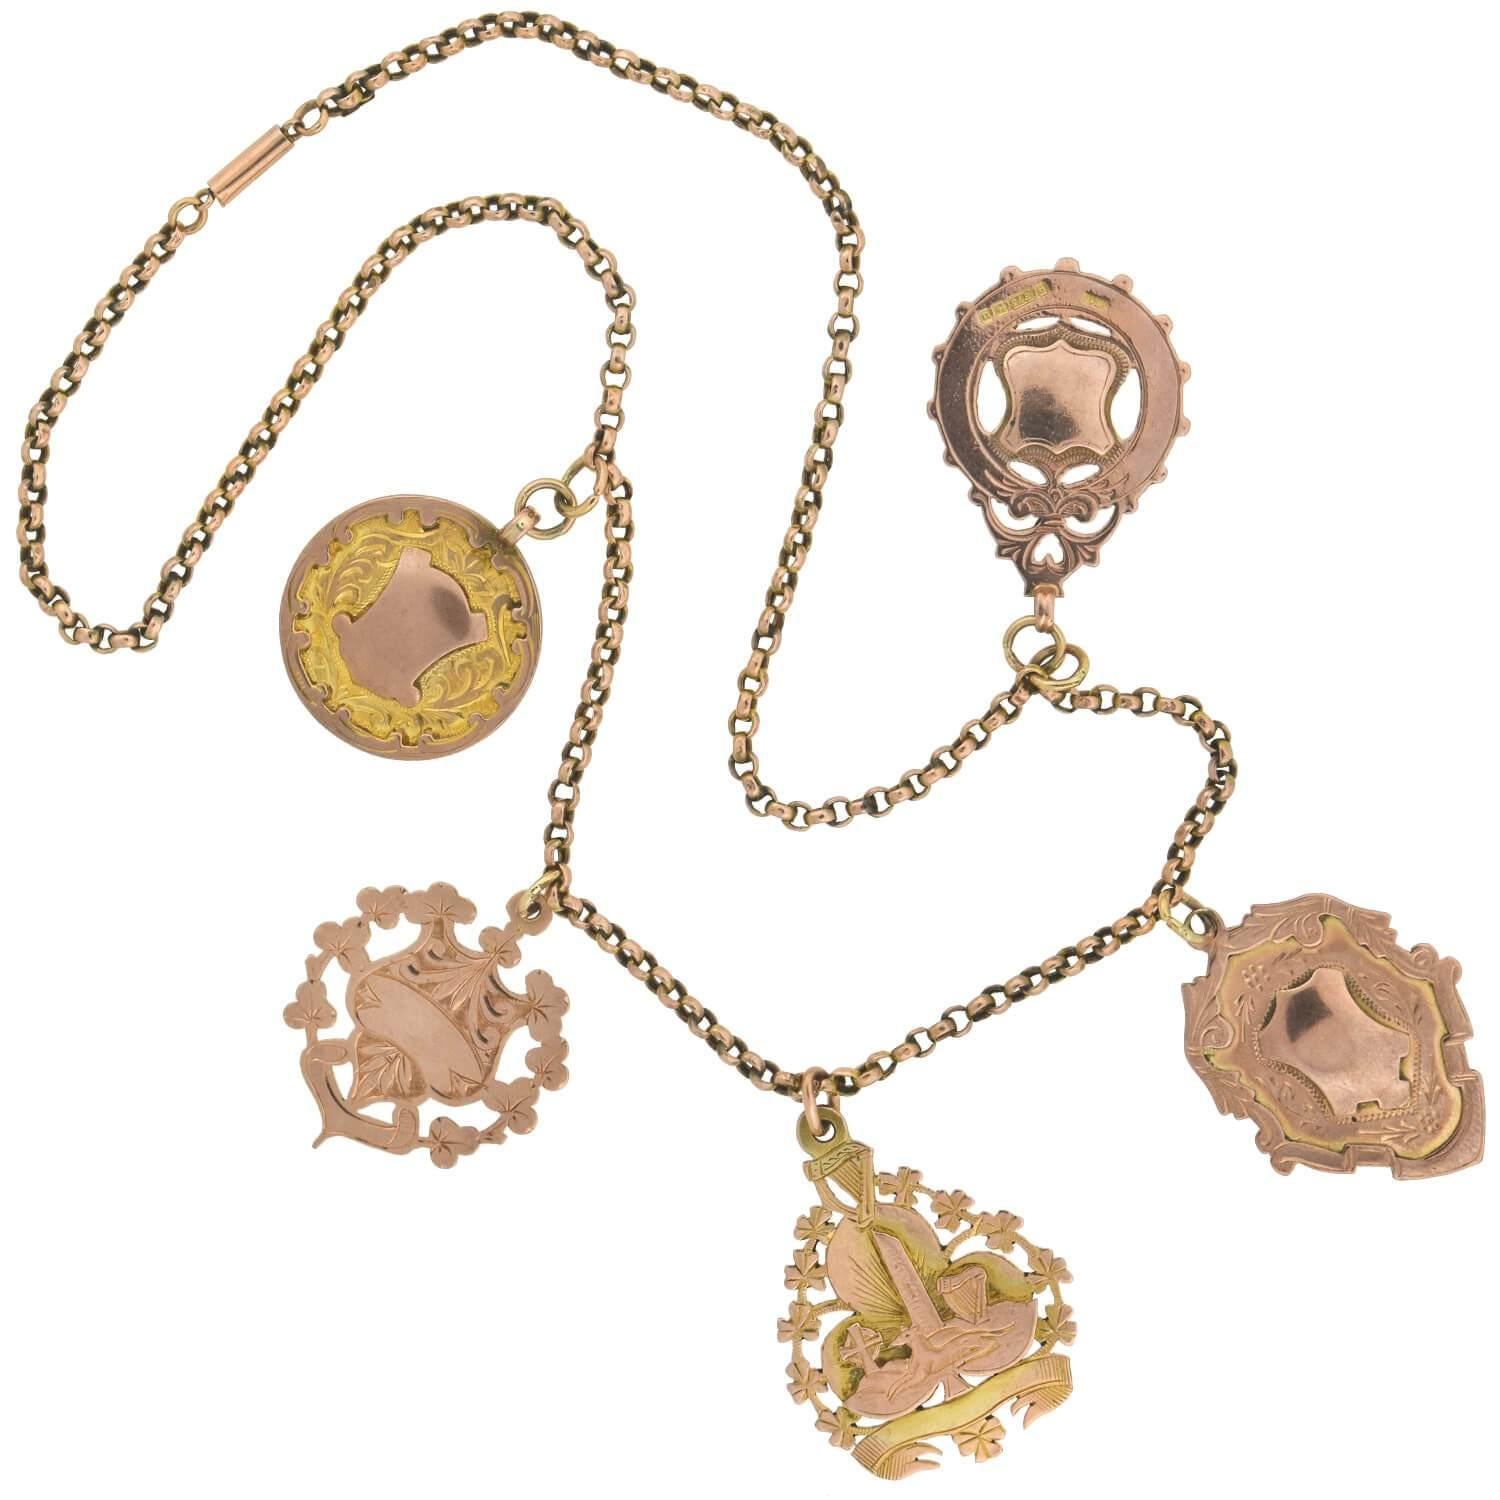 A stunning and bold medallion necklace with pieces from the Victorian (ca1880s) era! This lovely compilation piece is crafted in 9kt rose gold and adorns 5 beautiful and genuine medals hanging along the center of a lovely chain. Each decorative